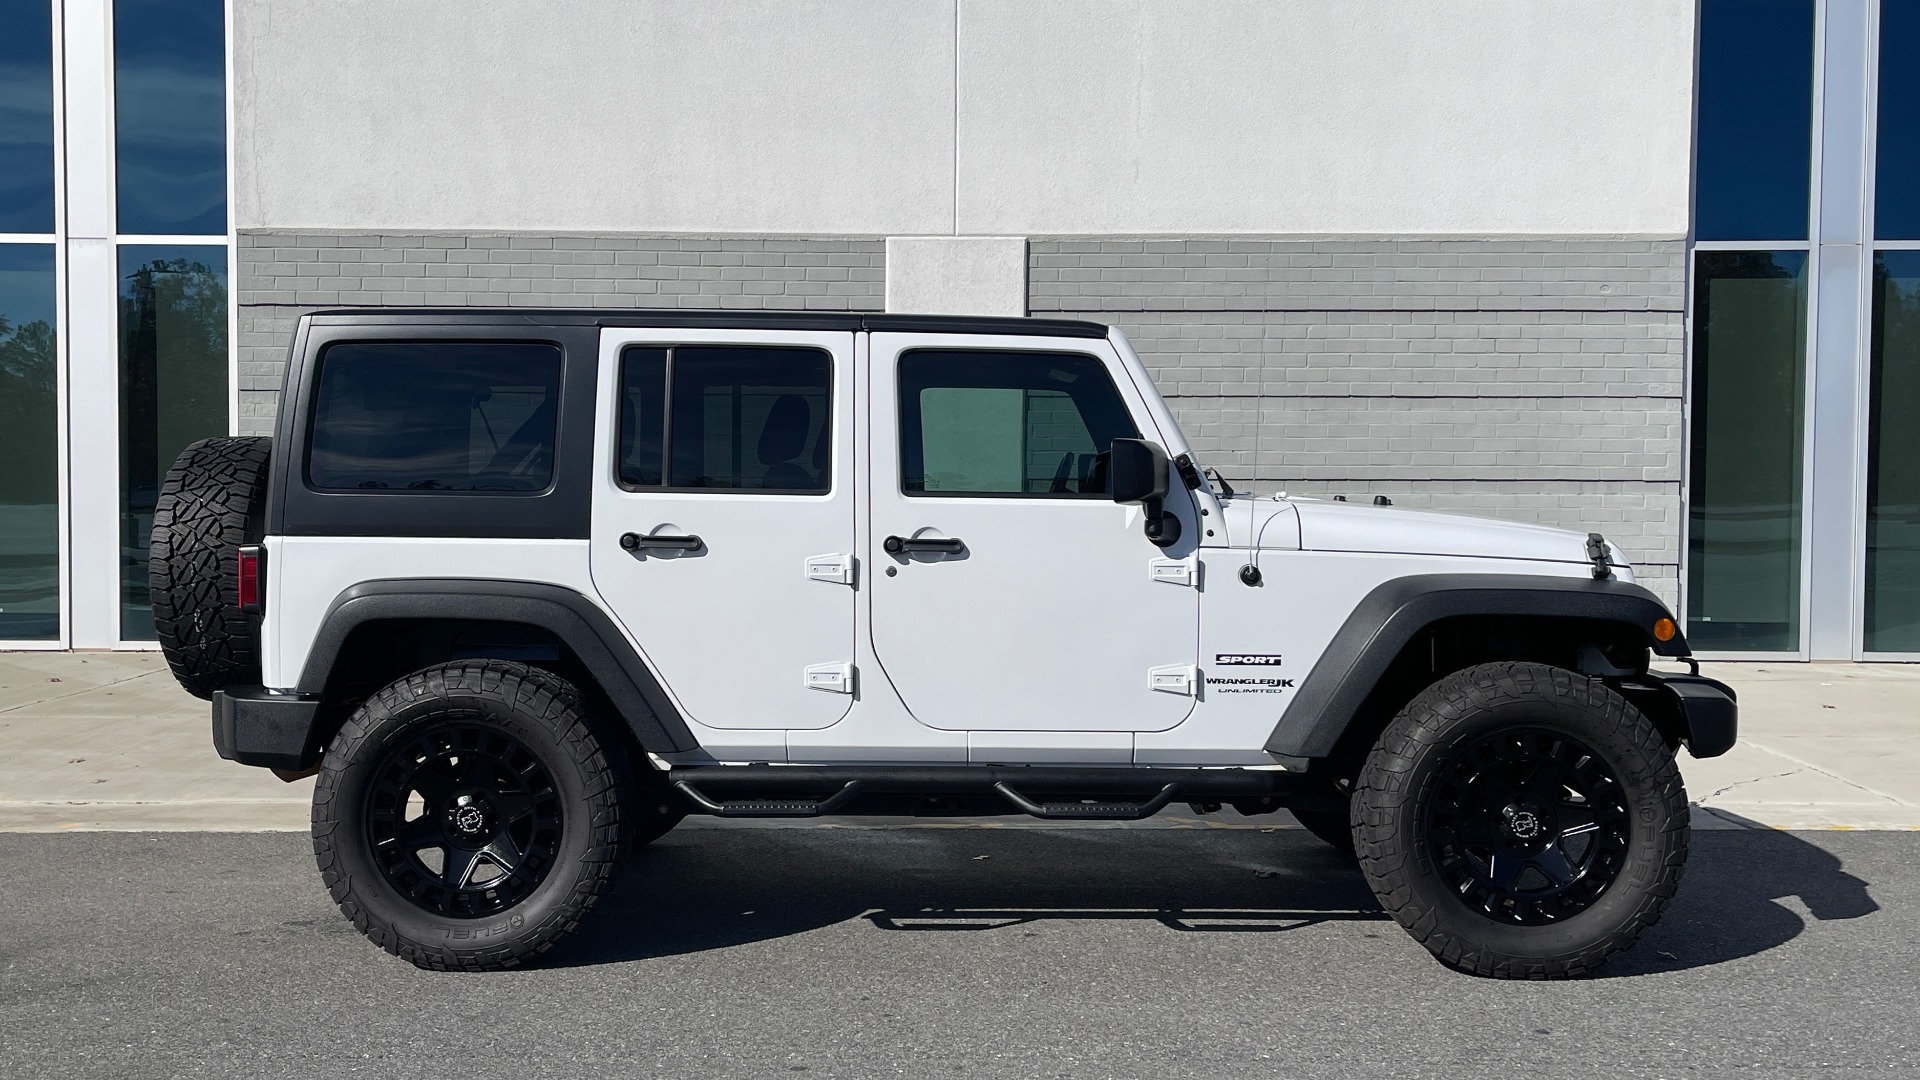 Used 2018 Jeep WRANGLER JK UNLIMITED SPORT S 4X4 / 3.6L V6 / AUTO / HARD-TOP / 20IN WHEELS for sale Sold at Formula Imports in Charlotte NC 28227 8